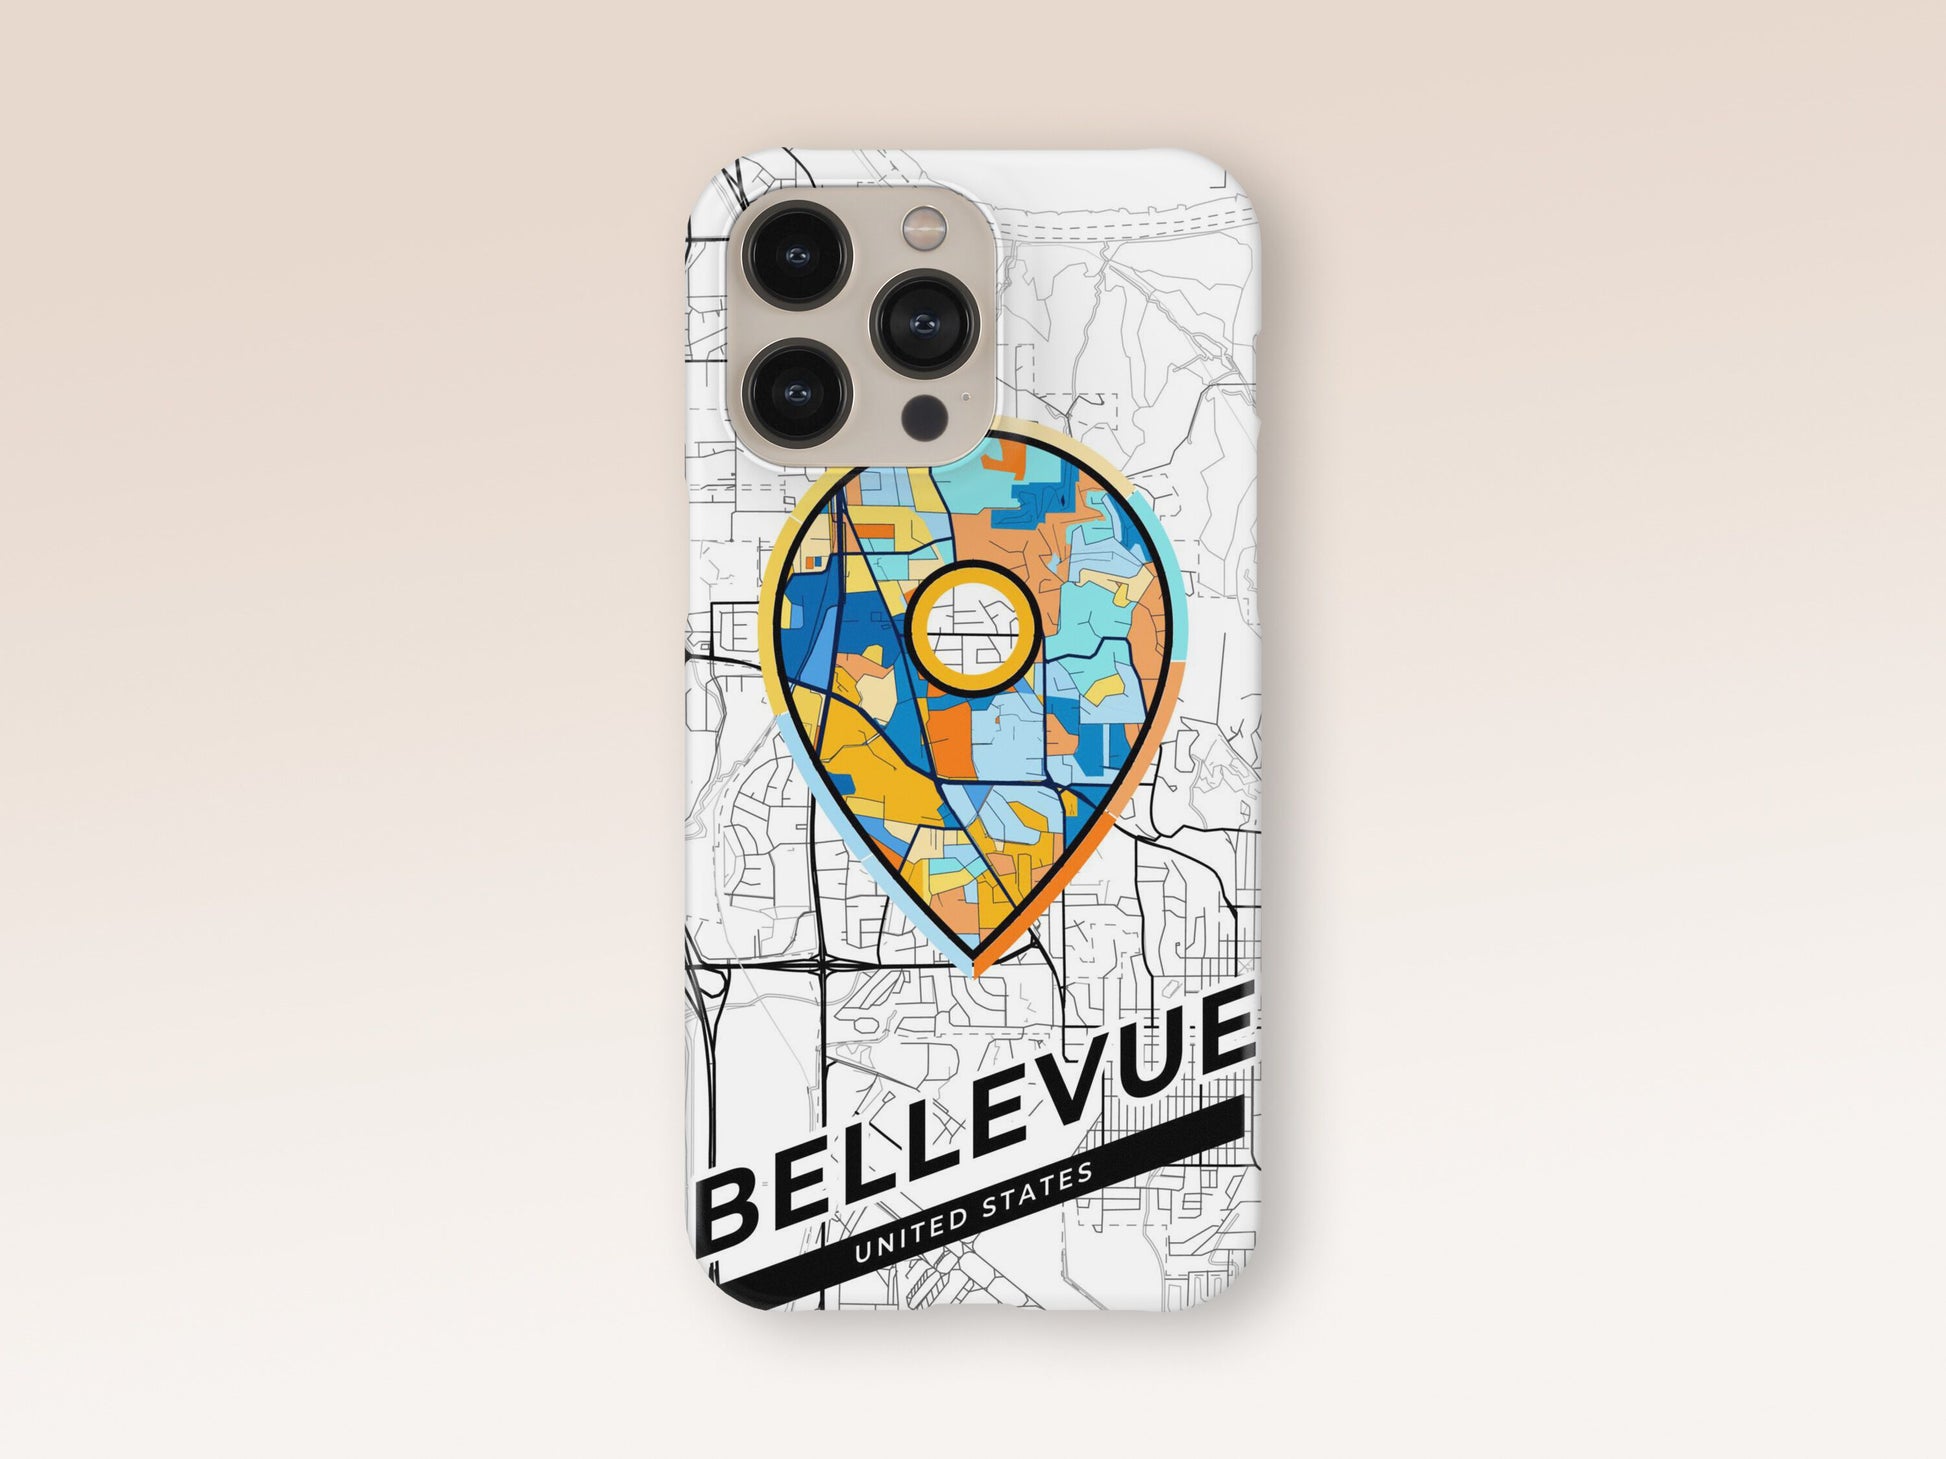 Bellevue Nebraska slim phone case with colorful icon. Birthday, wedding or housewarming gift. Couple match cases. 1